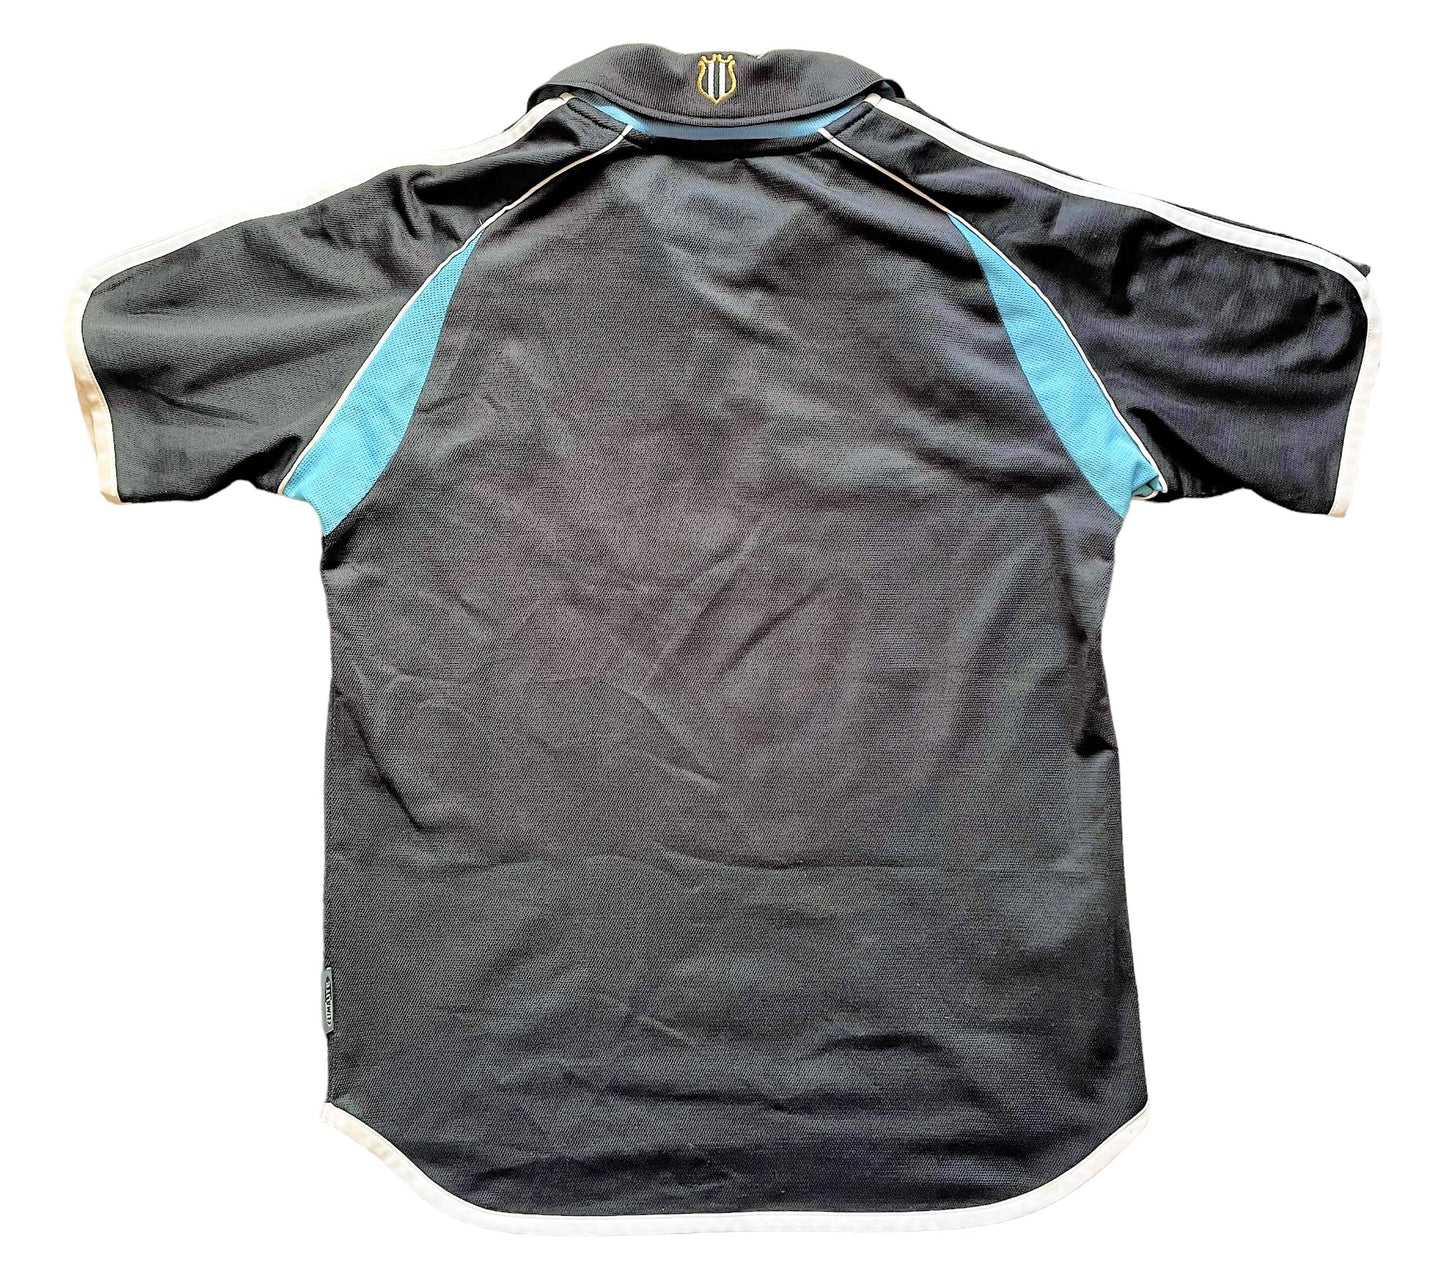 Newcastle Away Shirt 2000/01 (good) Adults XS/Youths. Height 19.5 inches